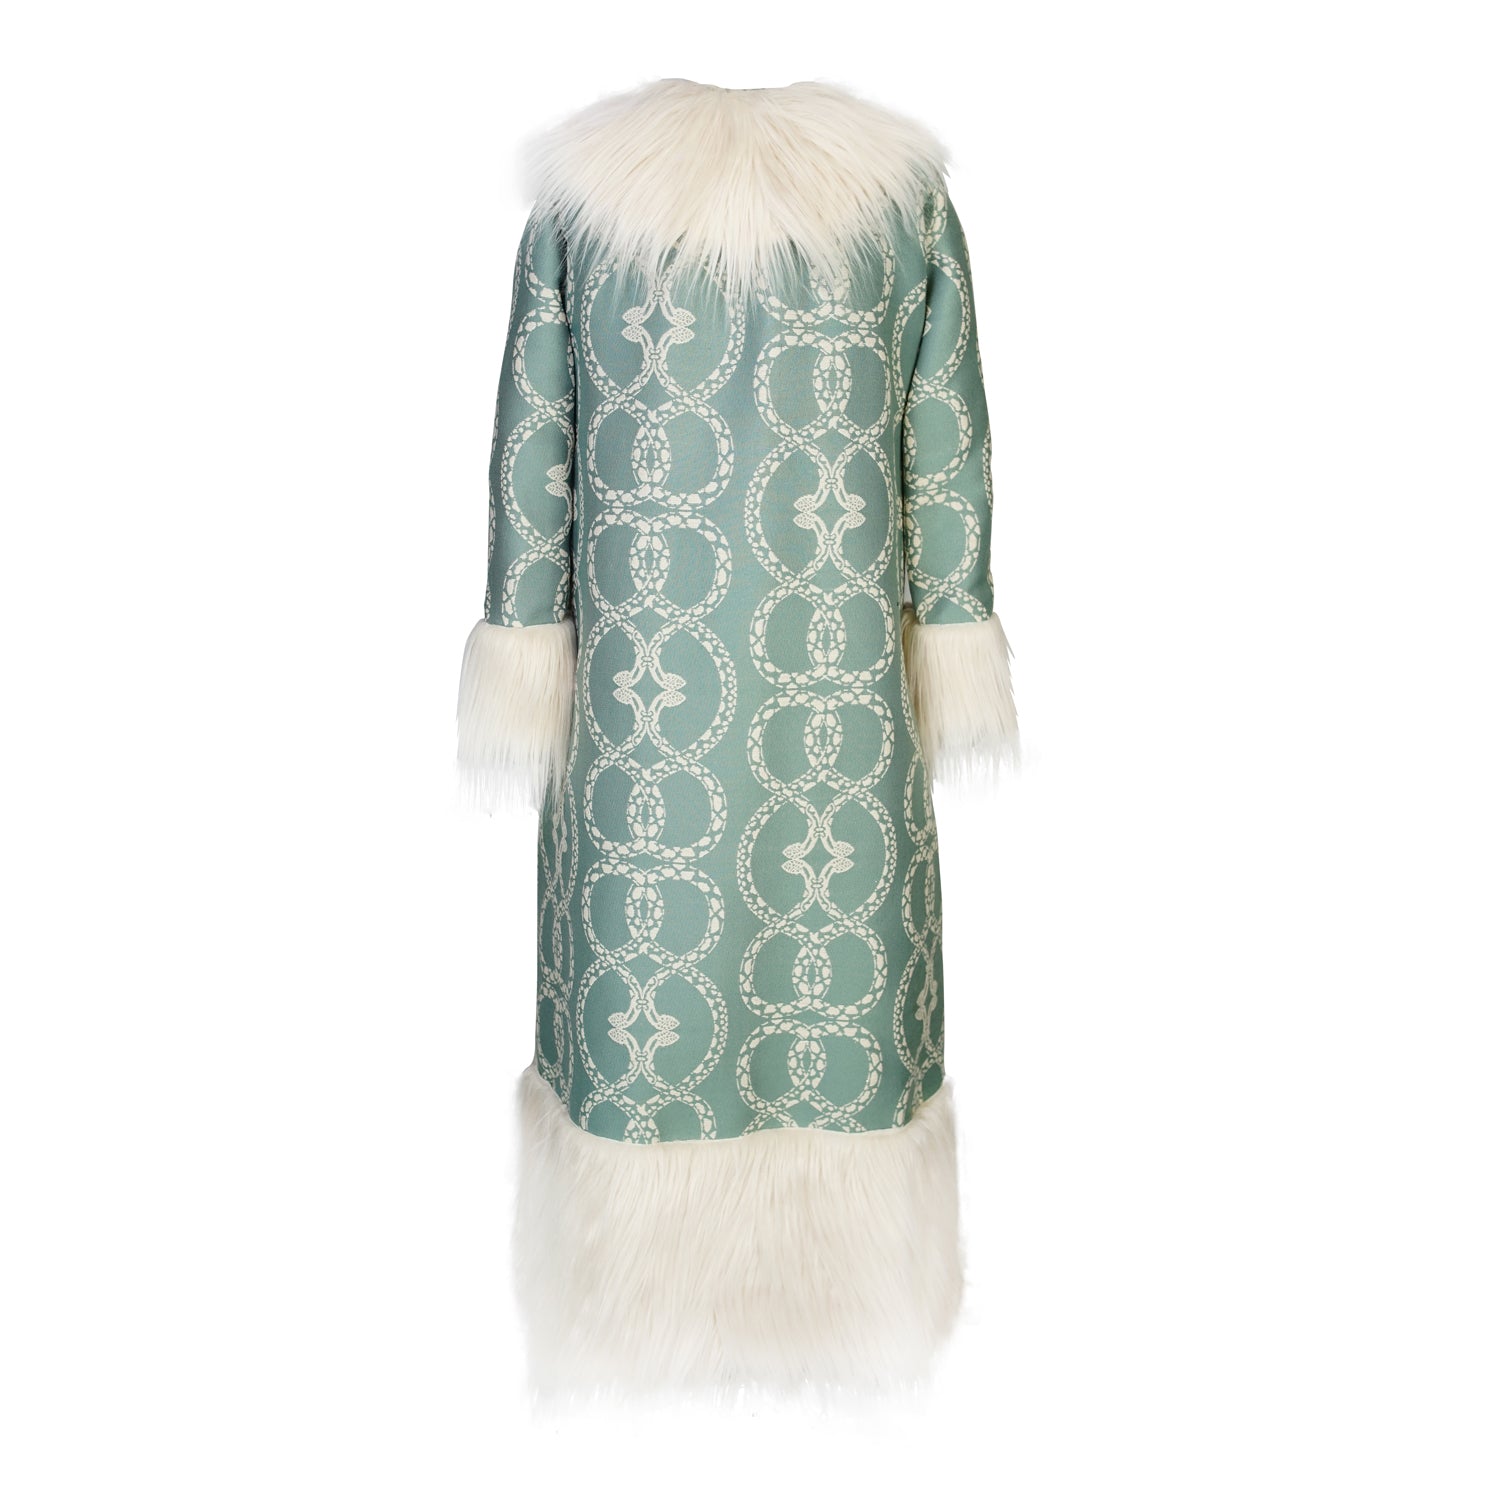 Long, penny lane style trench coat fashioned from a thick, mint green fabric embroidered with ivory snakes. Embellished with long ivory faux fur along collar, lapel, cuffs, and hem. Bohemian maximalism in style.